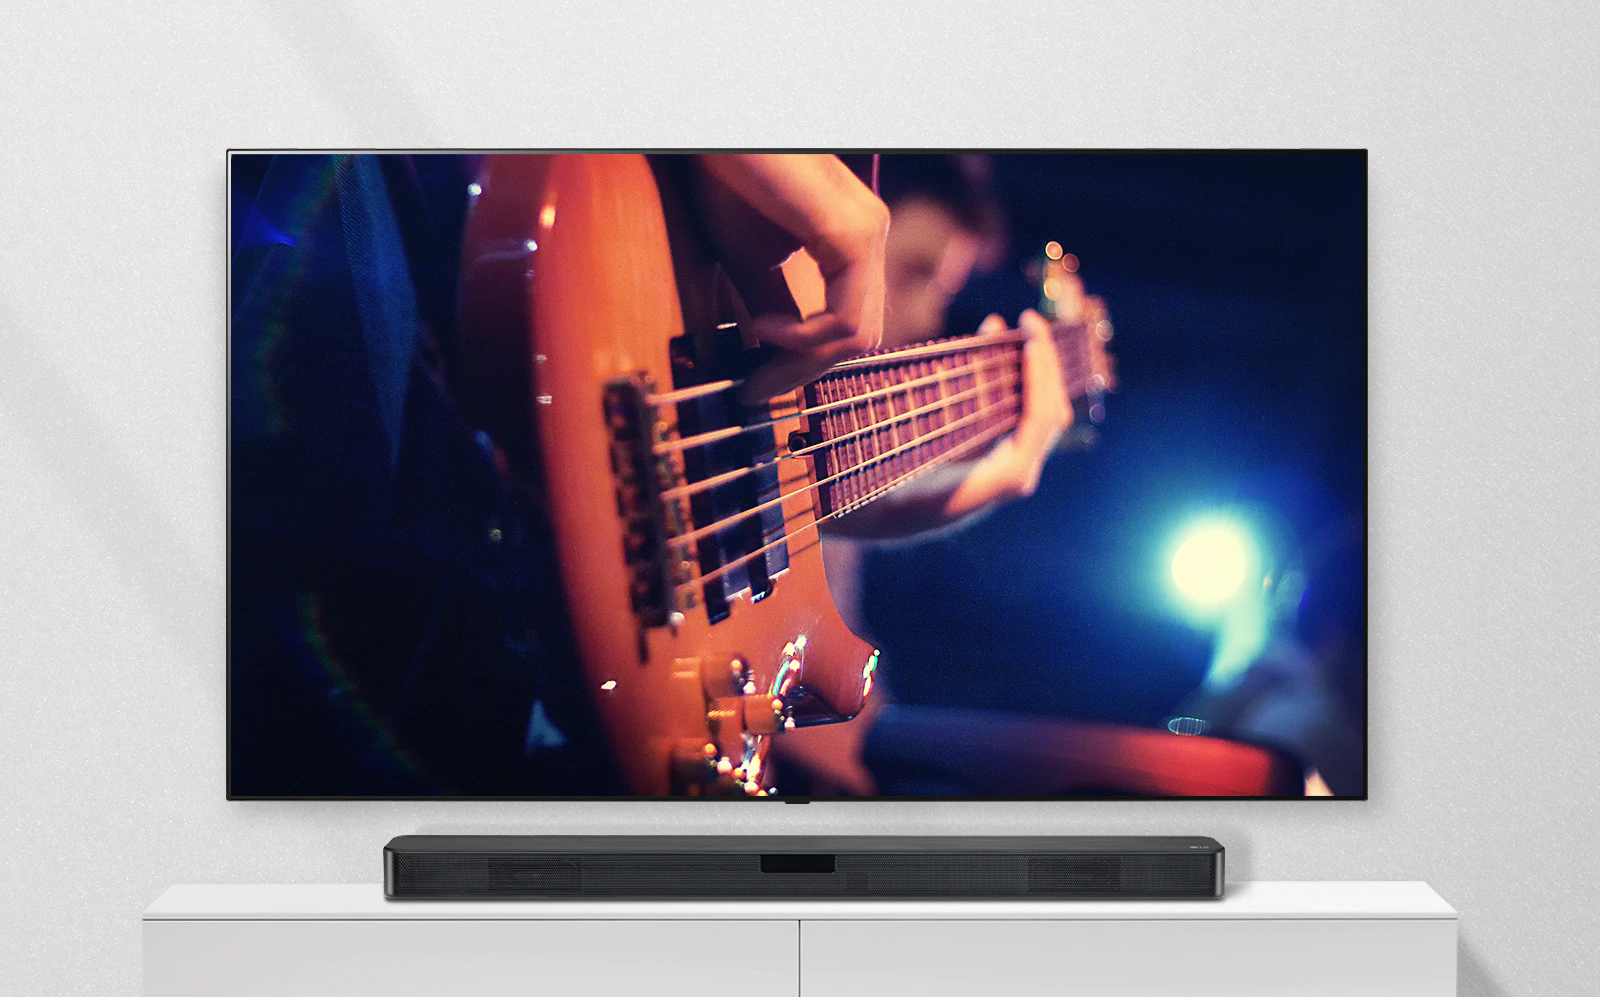 The TV is attached to the wall, and the sound bar is on a white shelf. TV showing a man plays guitar.